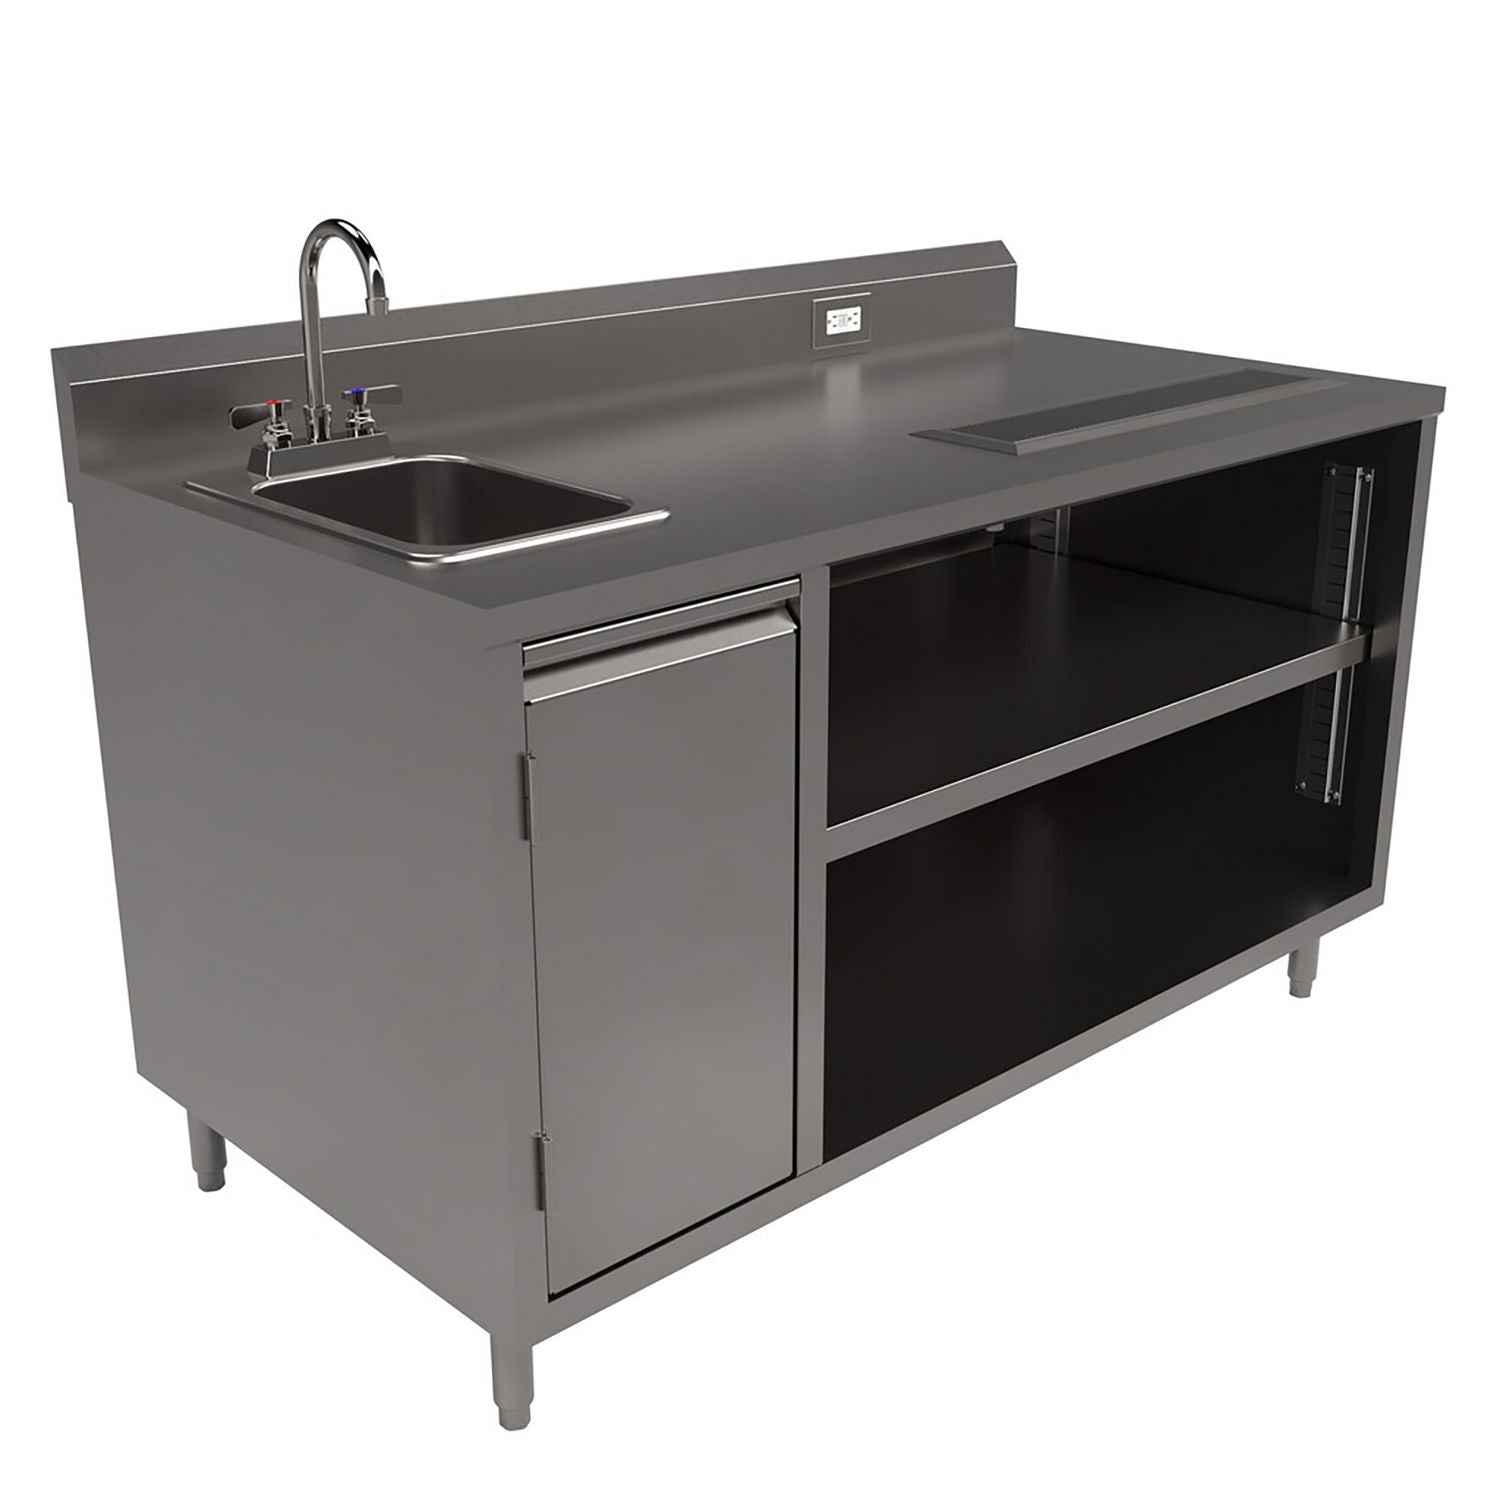 stainless-steel-beverage-table-with-left-sink-rectangular-30-x-60-x-415-silver-top-base-ships-in-4-6-business-days_bkebevt3060l - 2